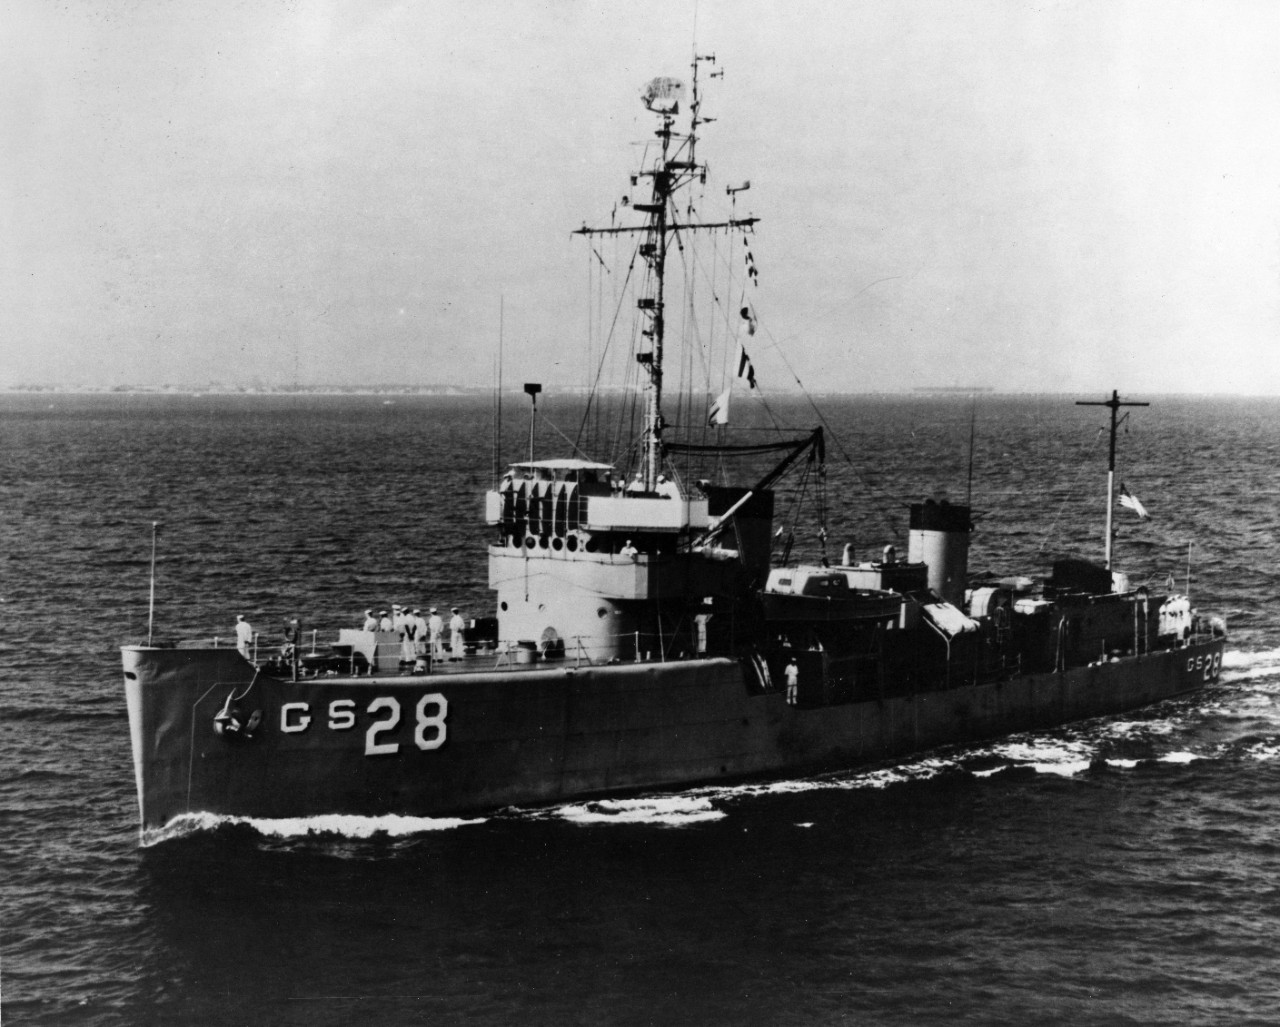 Port view of oceanographic survey ship USS Towhee (AGS-28) underway, with her crew manning the rails